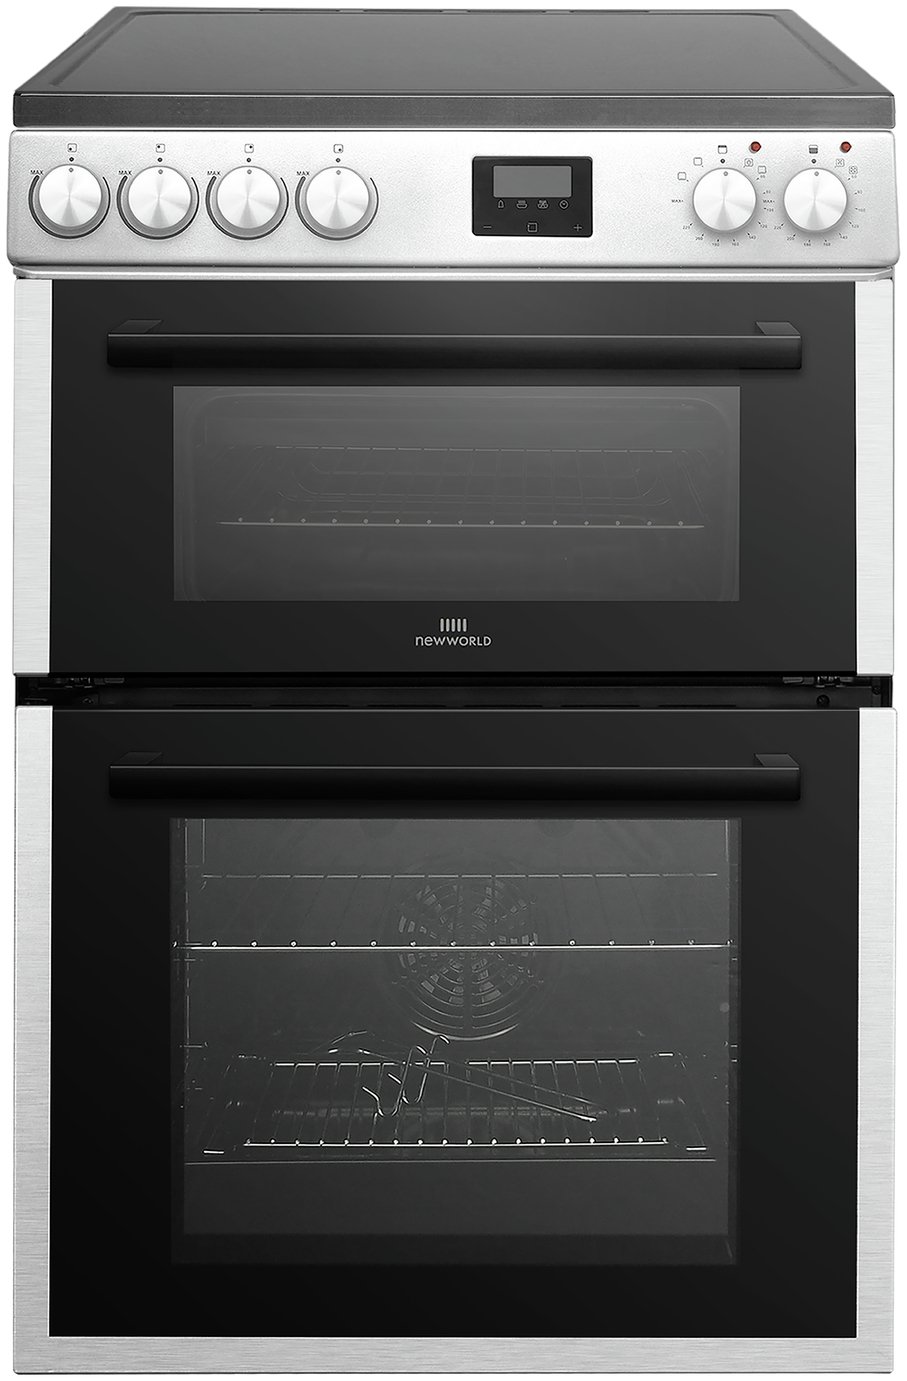 New World NWLS60DESL 60cm Double Oven Electric Cooker Silver